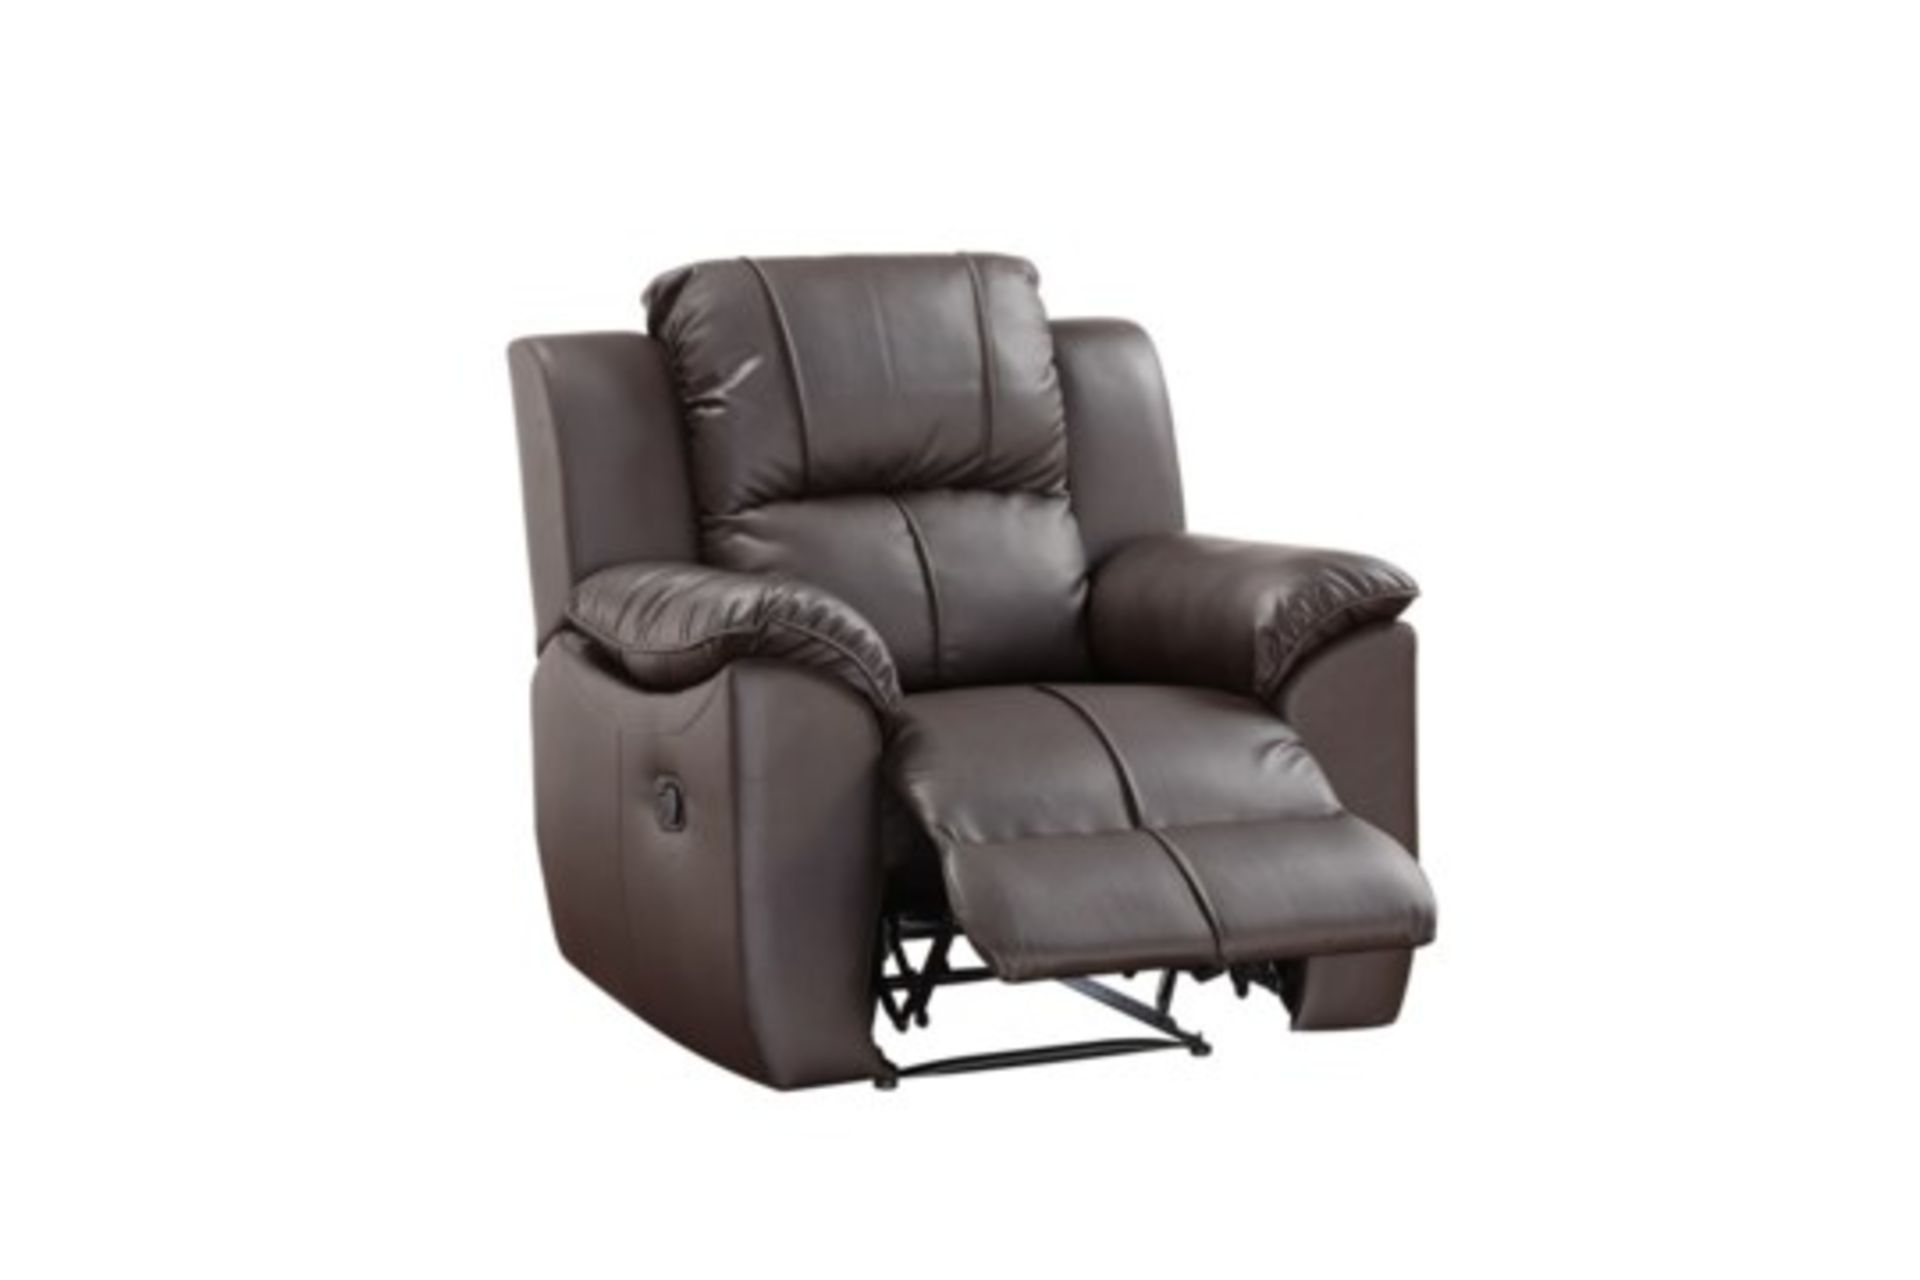 Boxed Brown Single Leather Sitting Room Reclining Arm Chair RRP £500 Appraisals Available Upon